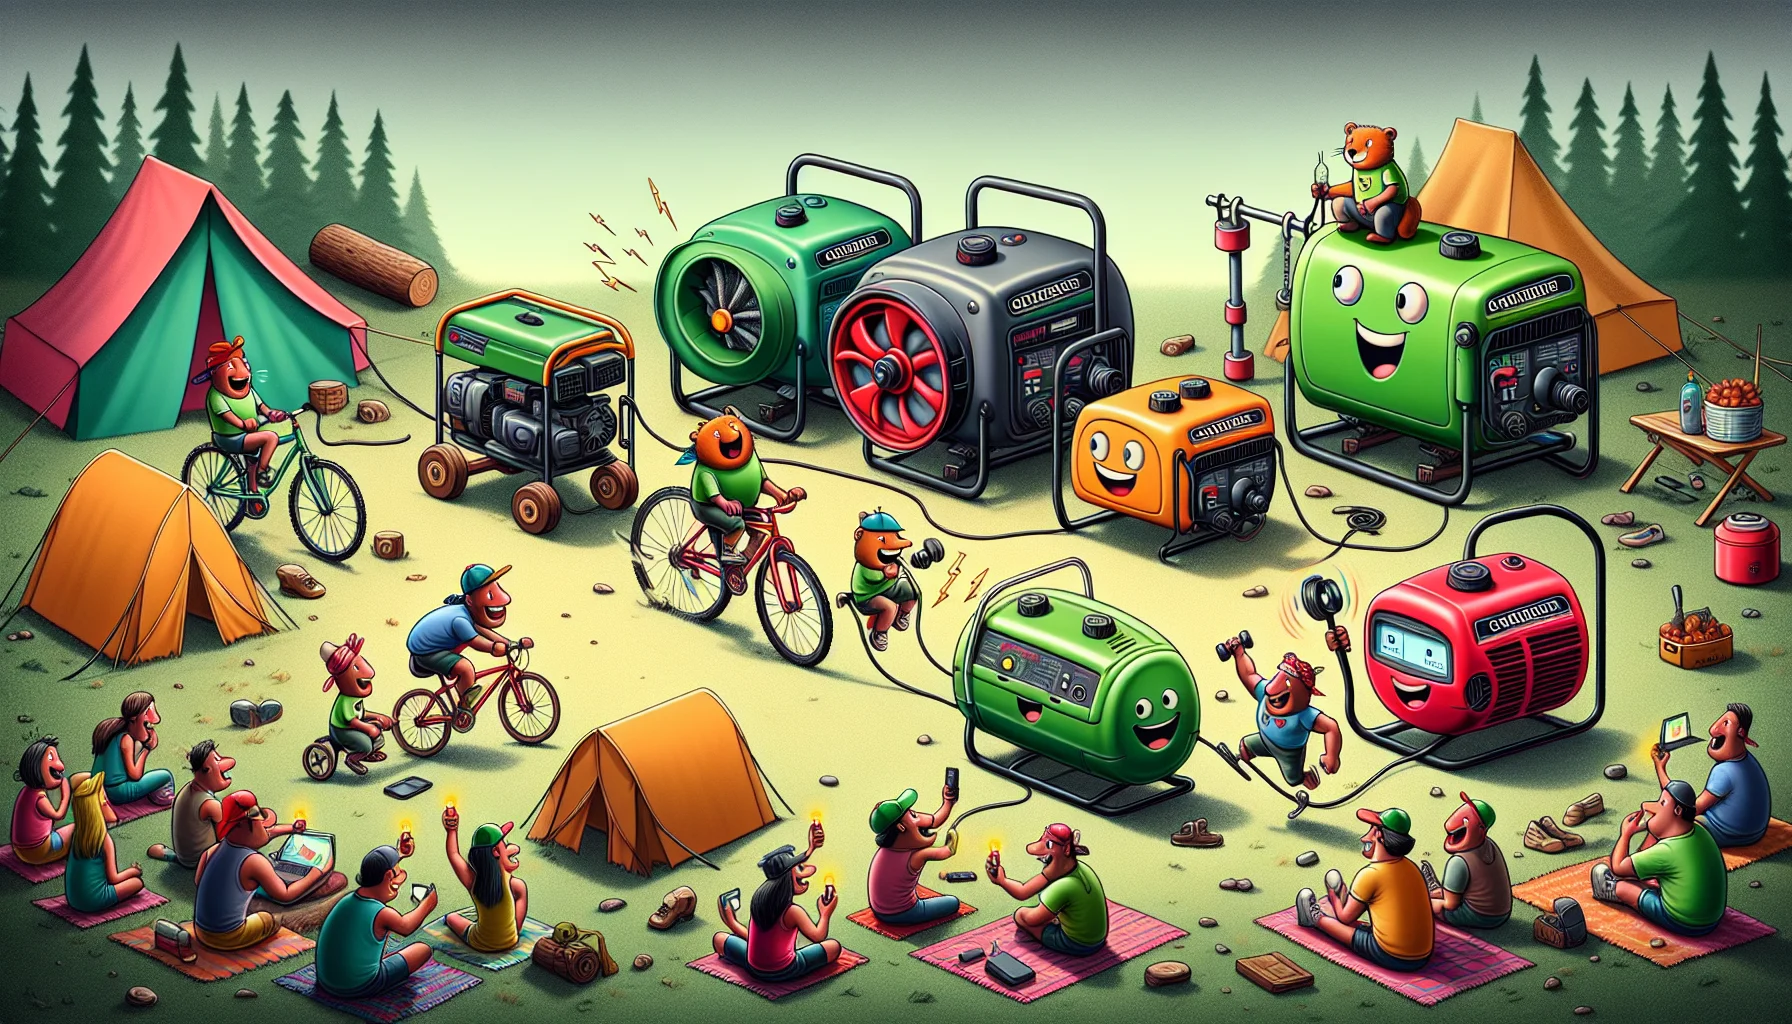 Imagine a humorous scene set in an outdoor camping site. The main focus of the scene is a line-up of six portable generators. Each is distinct in color and shape, from dark green to vibrant red. To add fun to the scene, each generator is depicted as a 'character' with a friendly face and cartoon-like arms. They are happily performing amusing actions to generate electricity. One is pedaling a bicycle, another is turning a large hamster wheel, and a third one is mockingly lifting weights. Around them, a group of diverse campers are laughing and pointing at the hilarious display, having their devices light up from generated electricity.